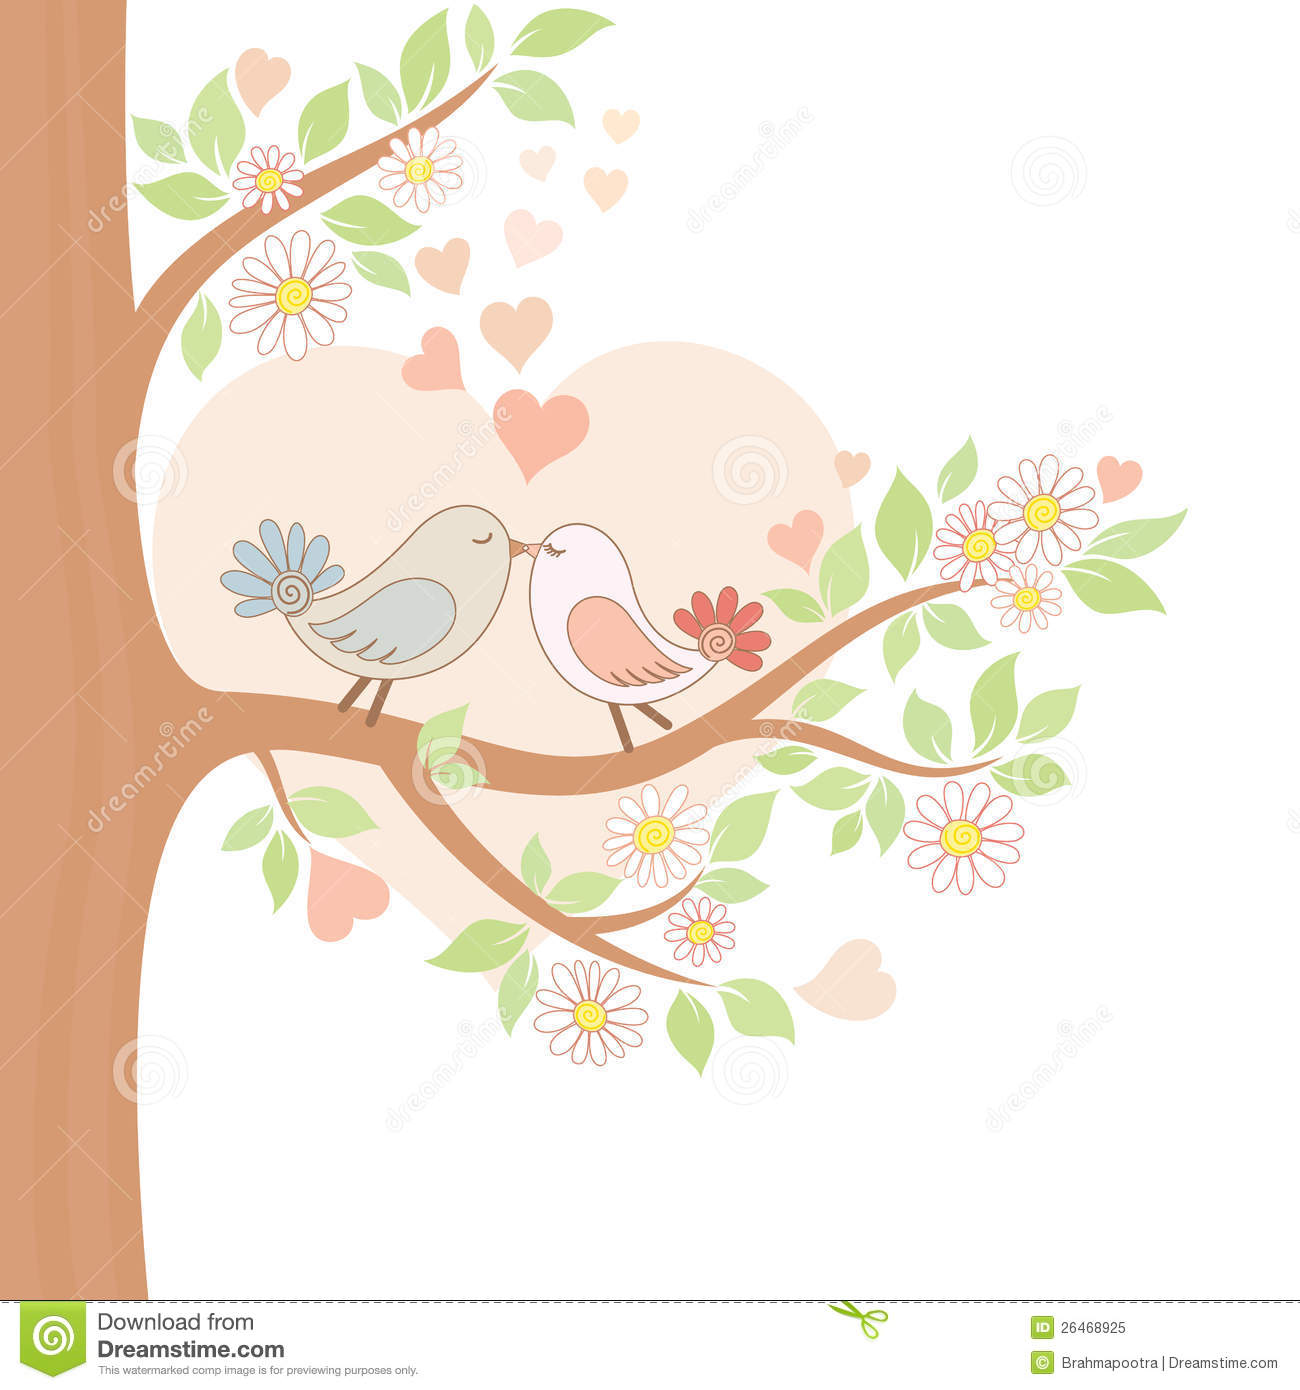 Two Kissing Birds On The Tree Royalty Free Stock Photo   Image